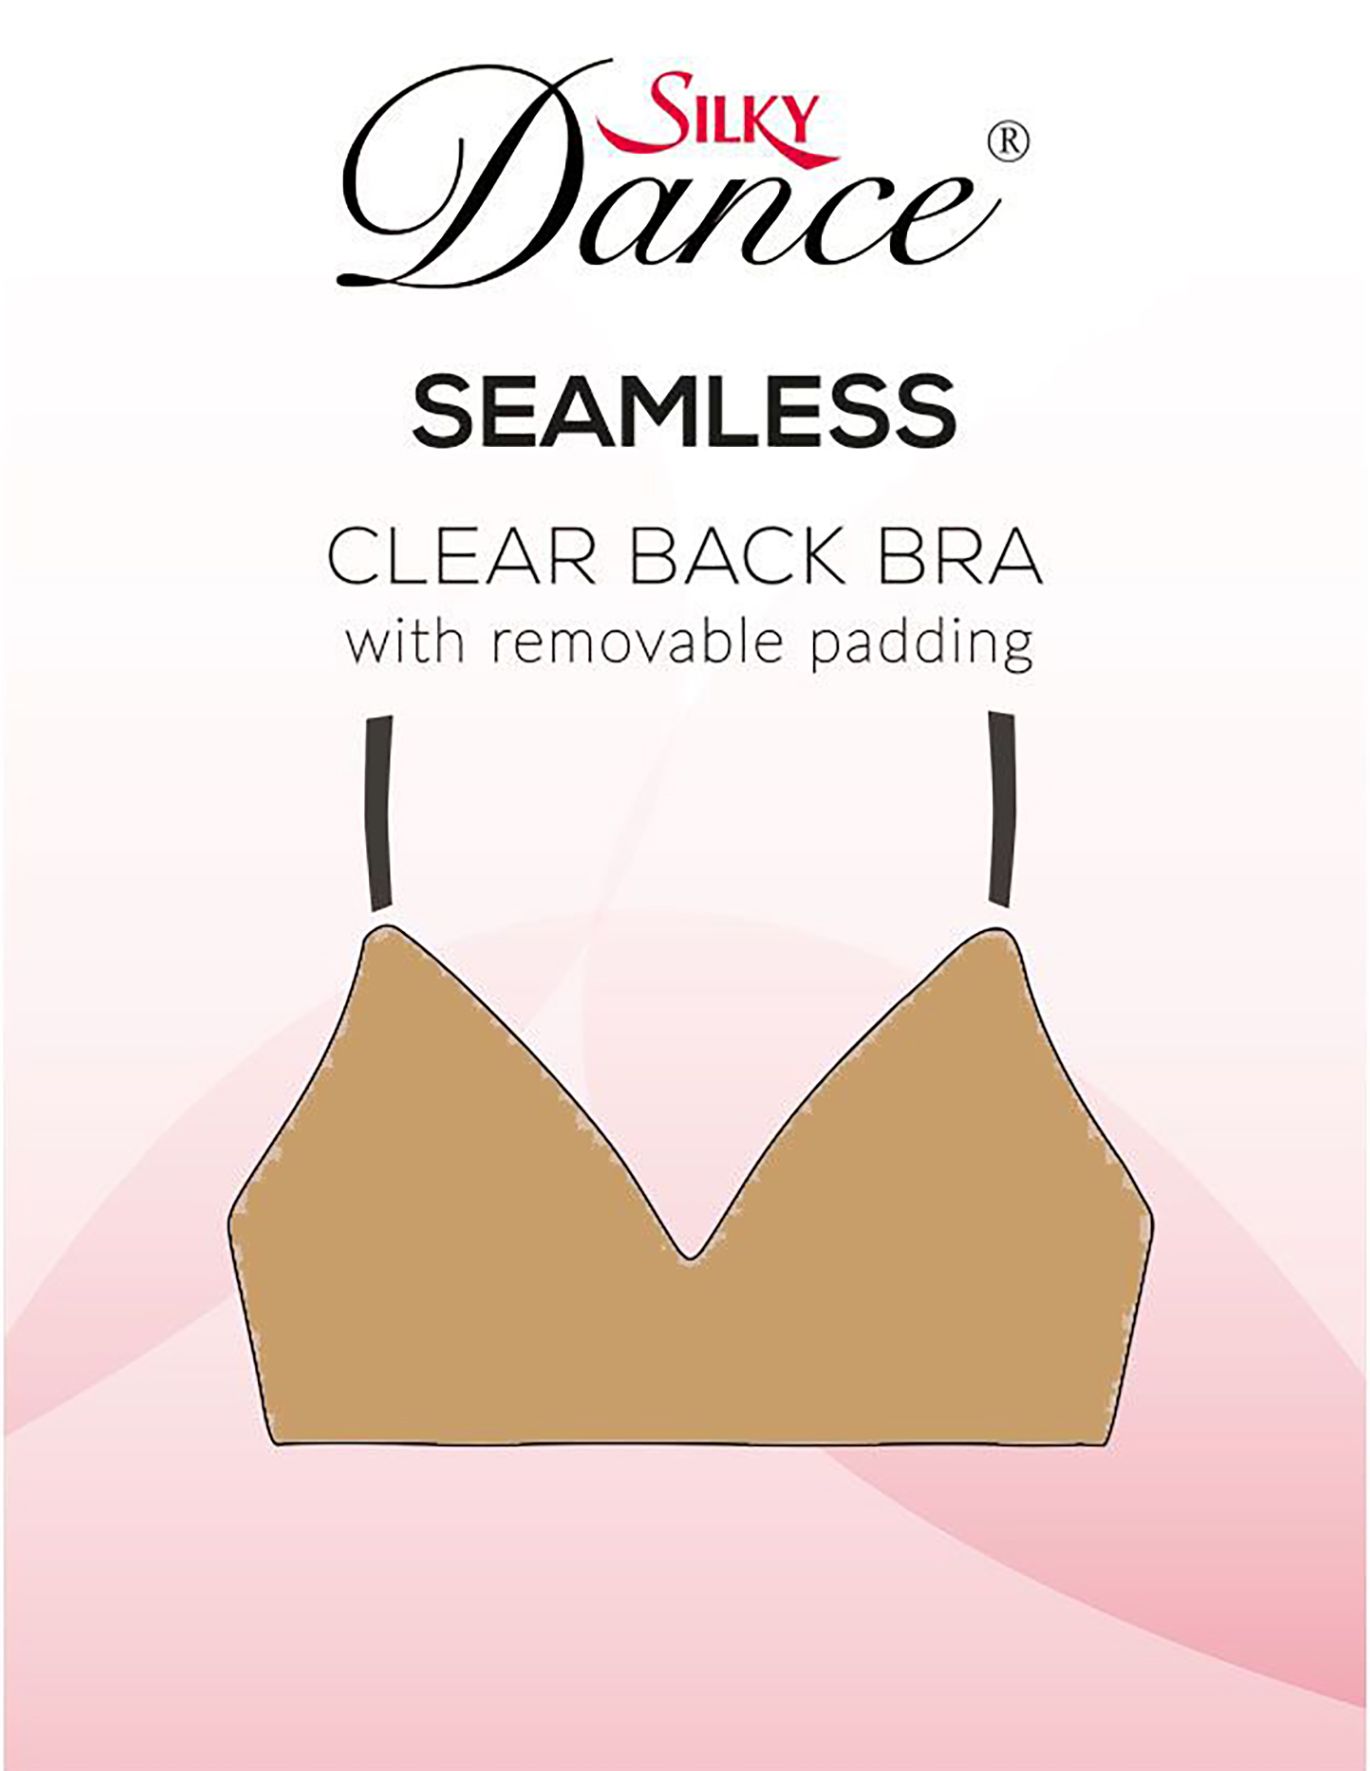 Silky Dance Seamless Clear Back Bra with Removable Paddding